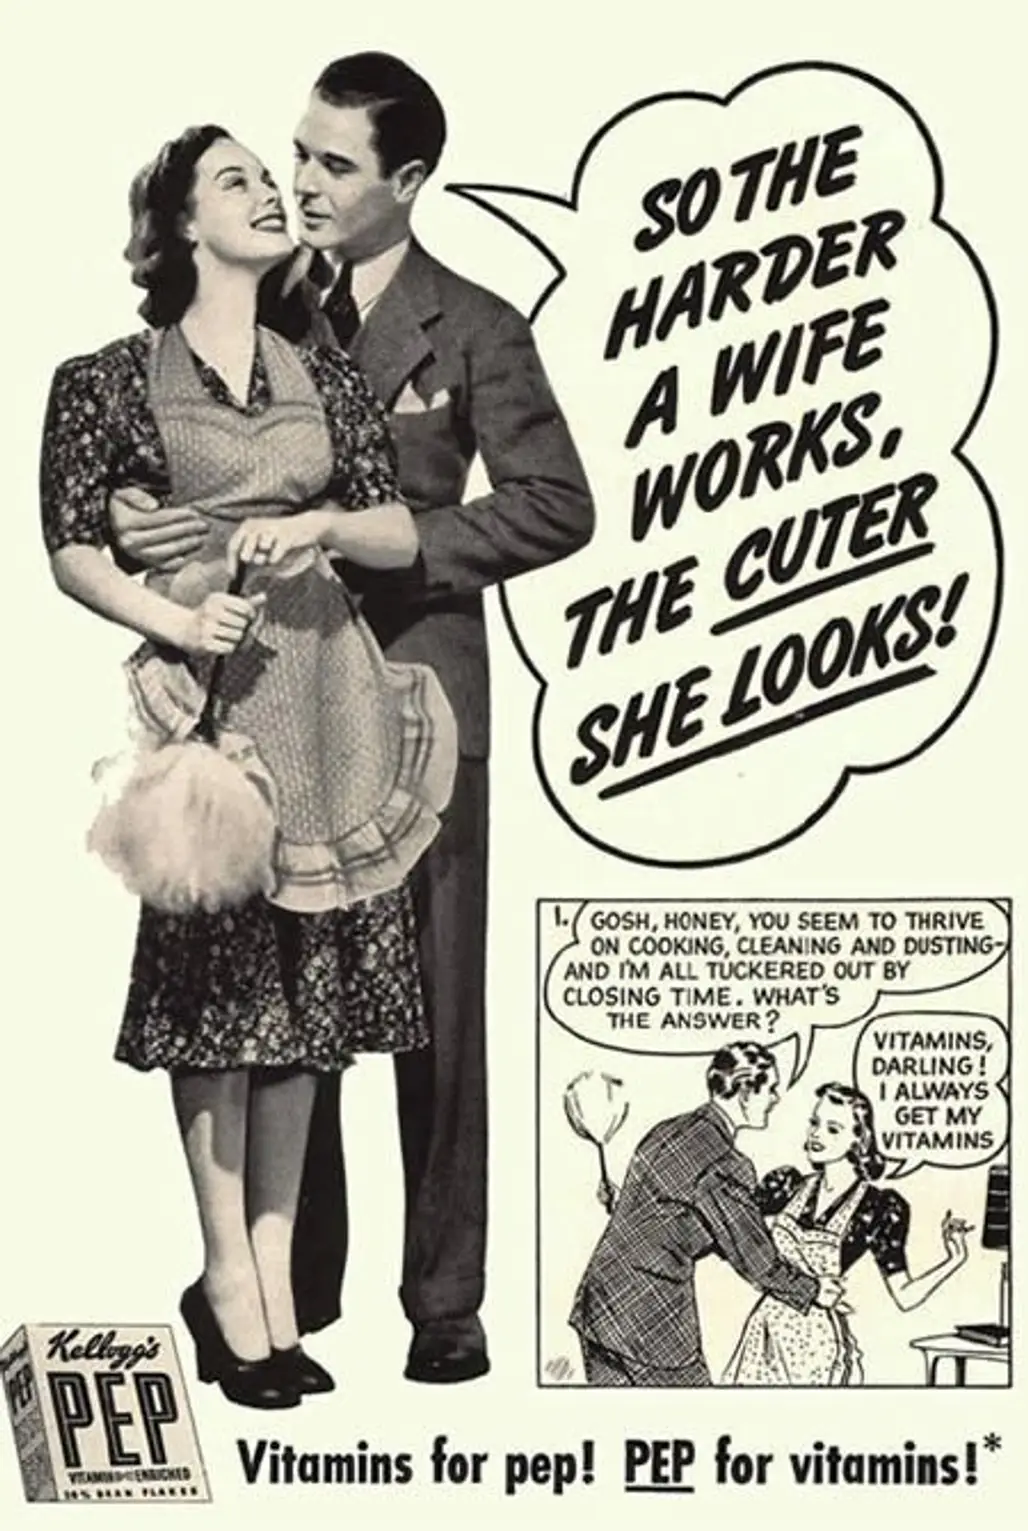 Take Your Vitamins...so You Can Work Harder for Your Husband?!